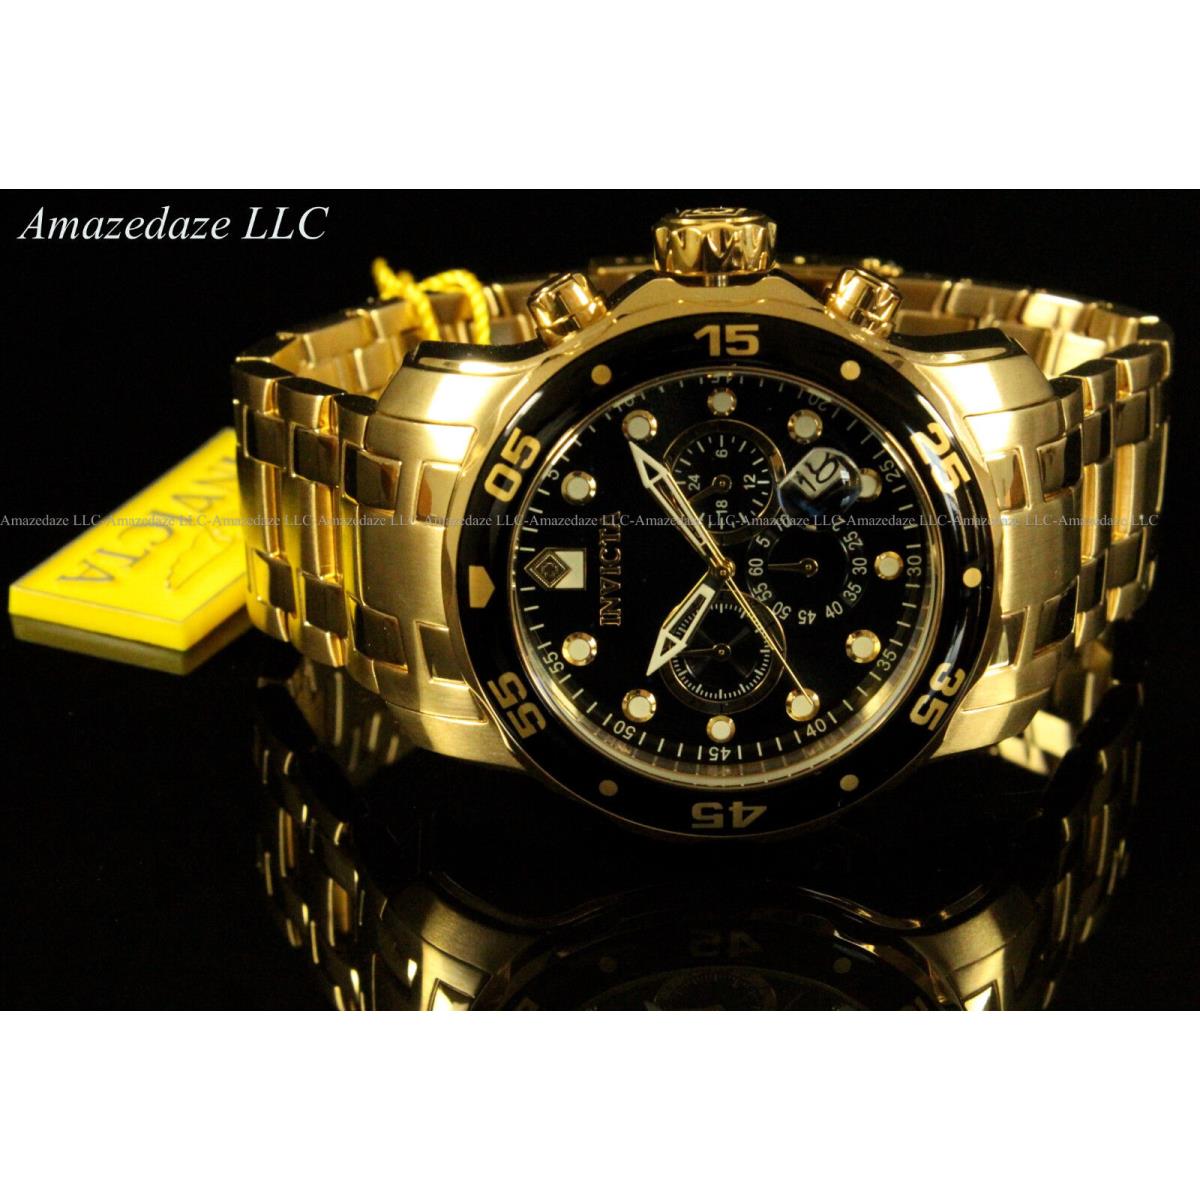 Invicta watch Pro Diver - Black Dial, Yellow Gold Band, Black Bezel